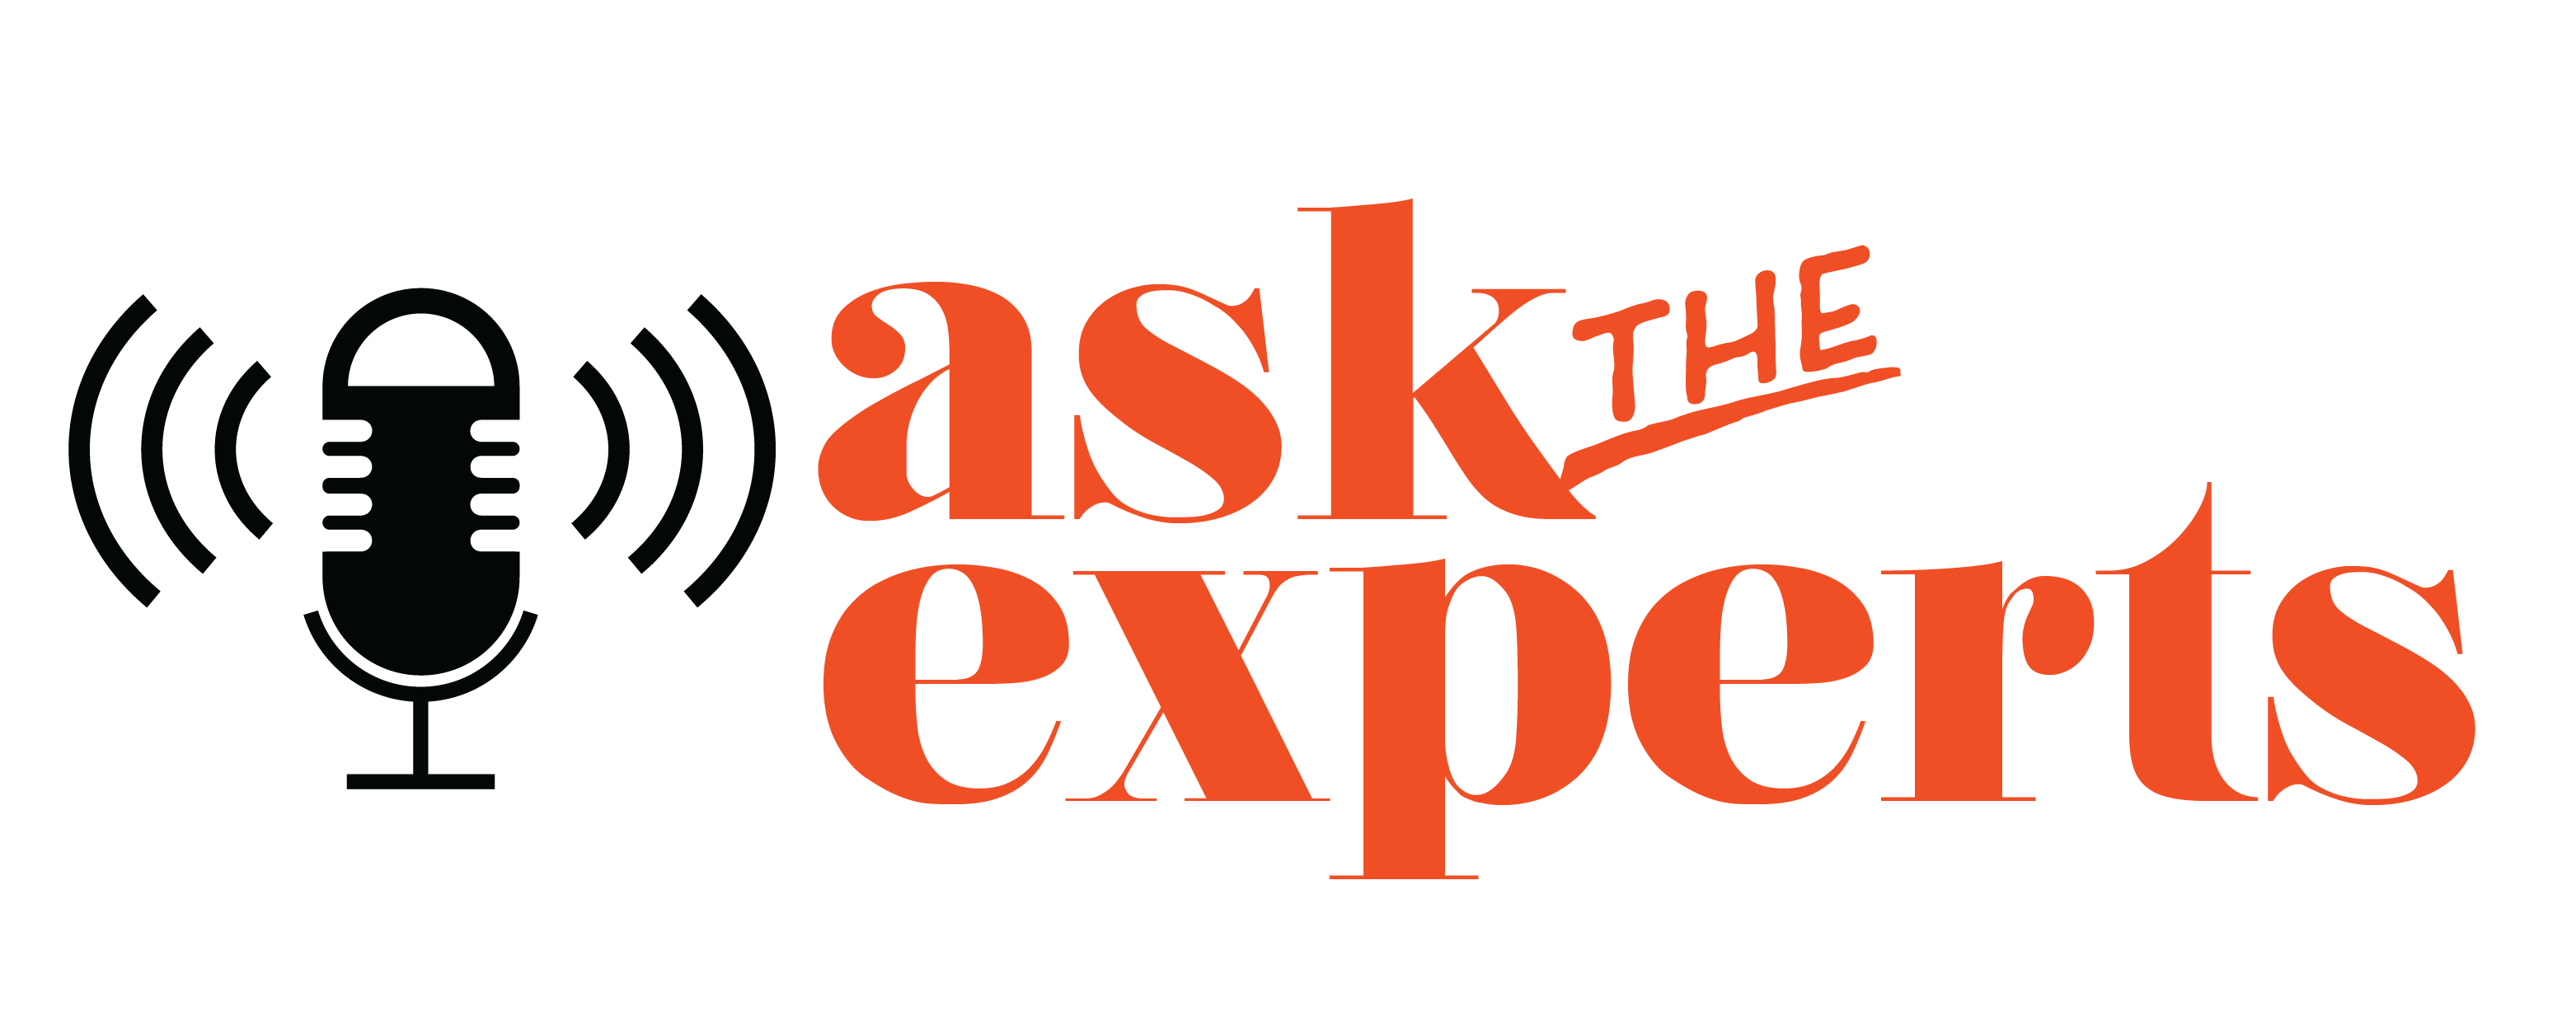 ask the experts